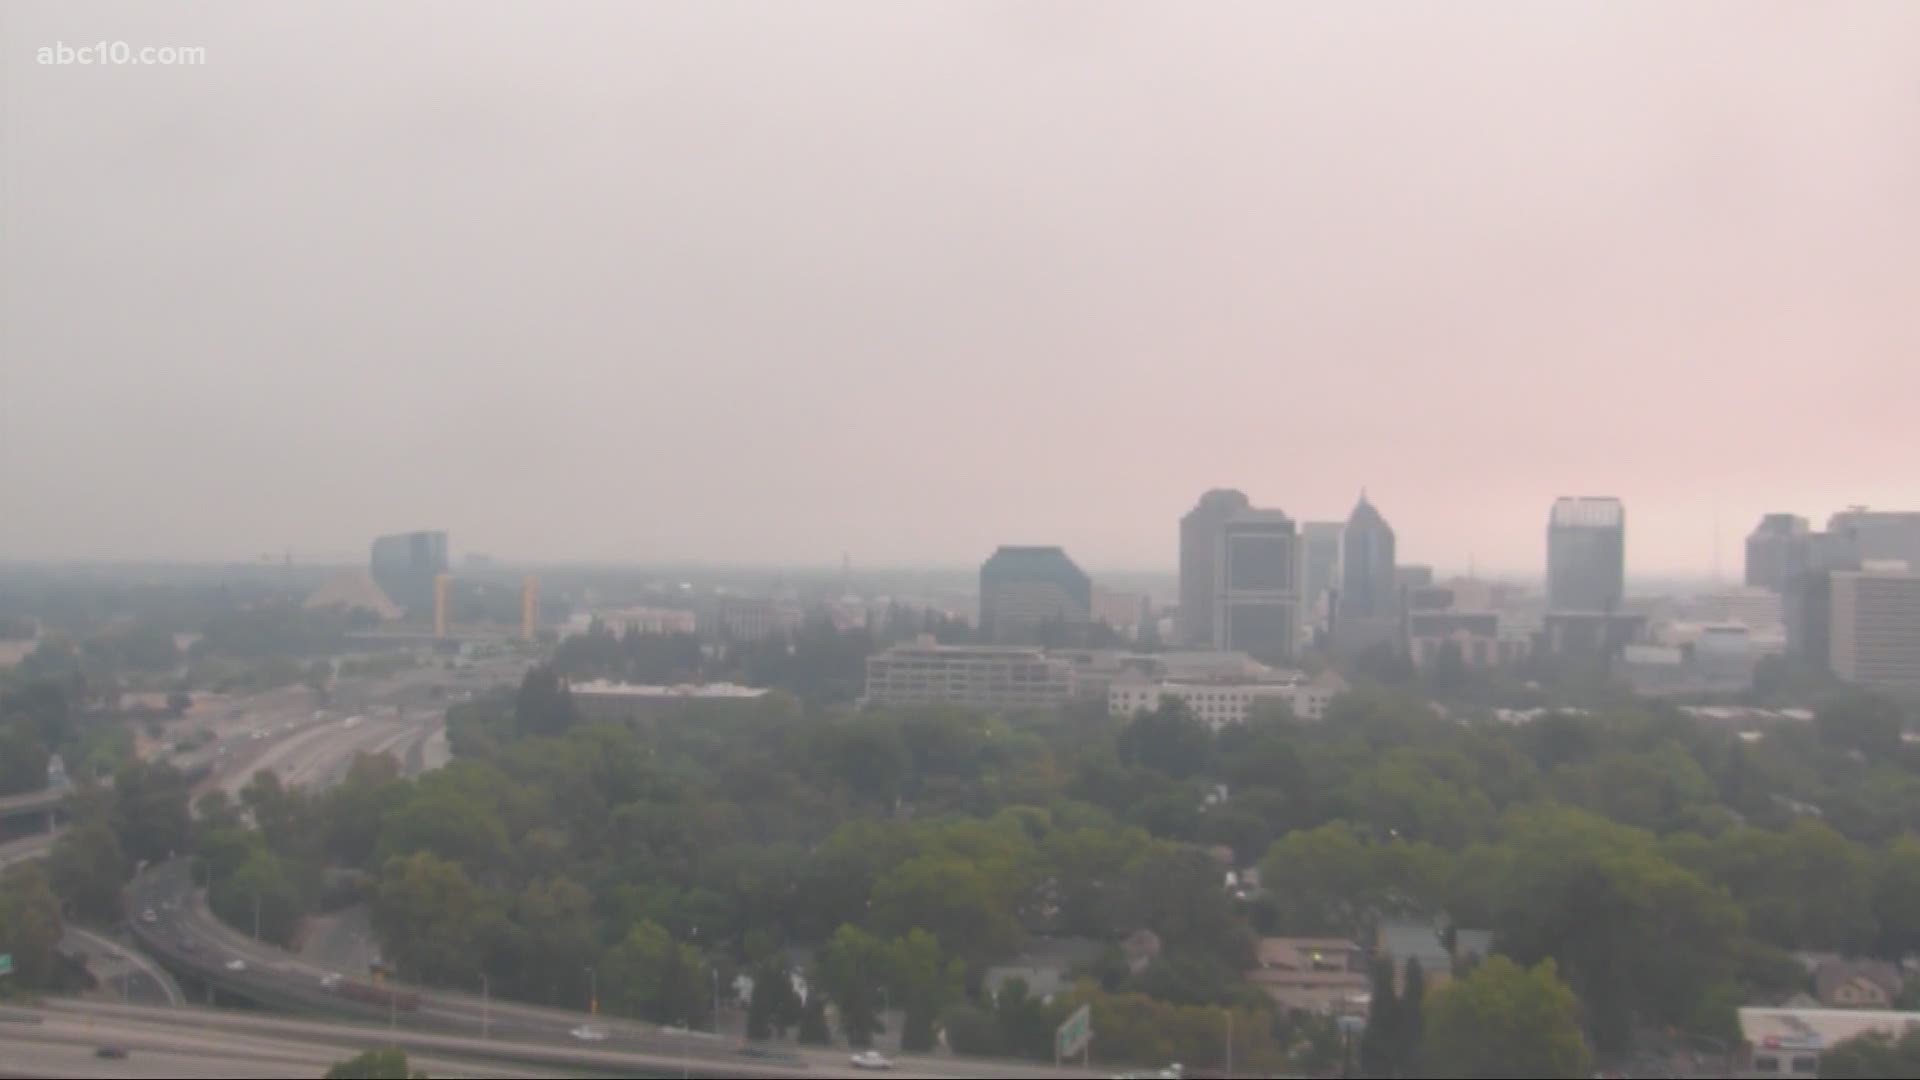 Massive wildfires burning throughout California are making the air in Sacramento unhealthy to breathe. Here is how to keep safe from wildfire smoke.